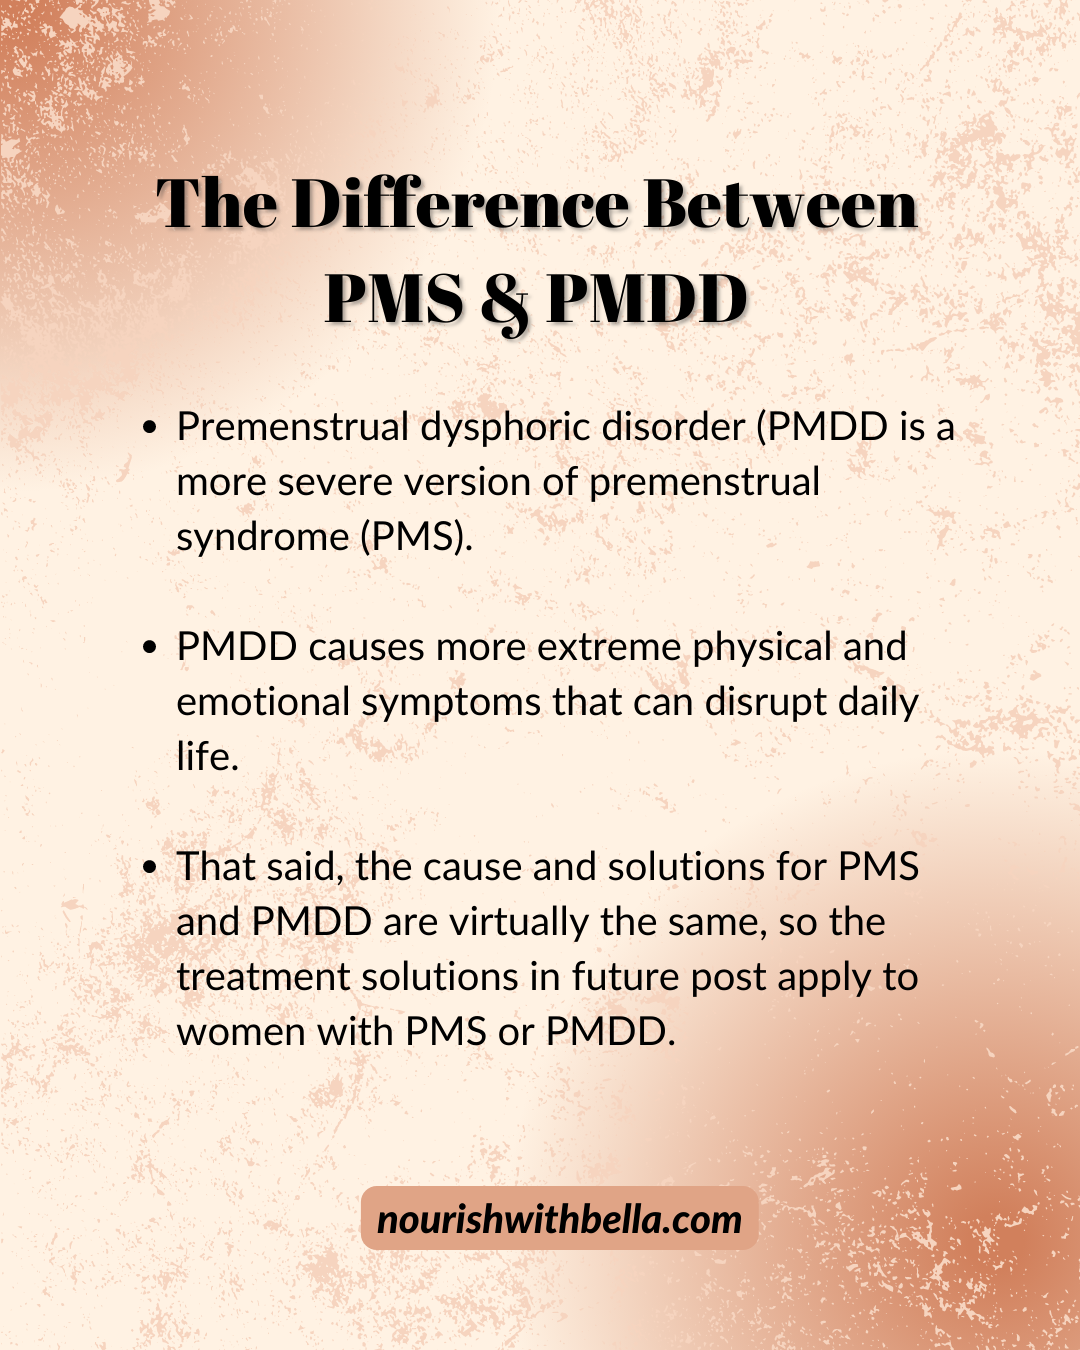 Oxford CBT - PMDD can cause severe PMS in the week or two before